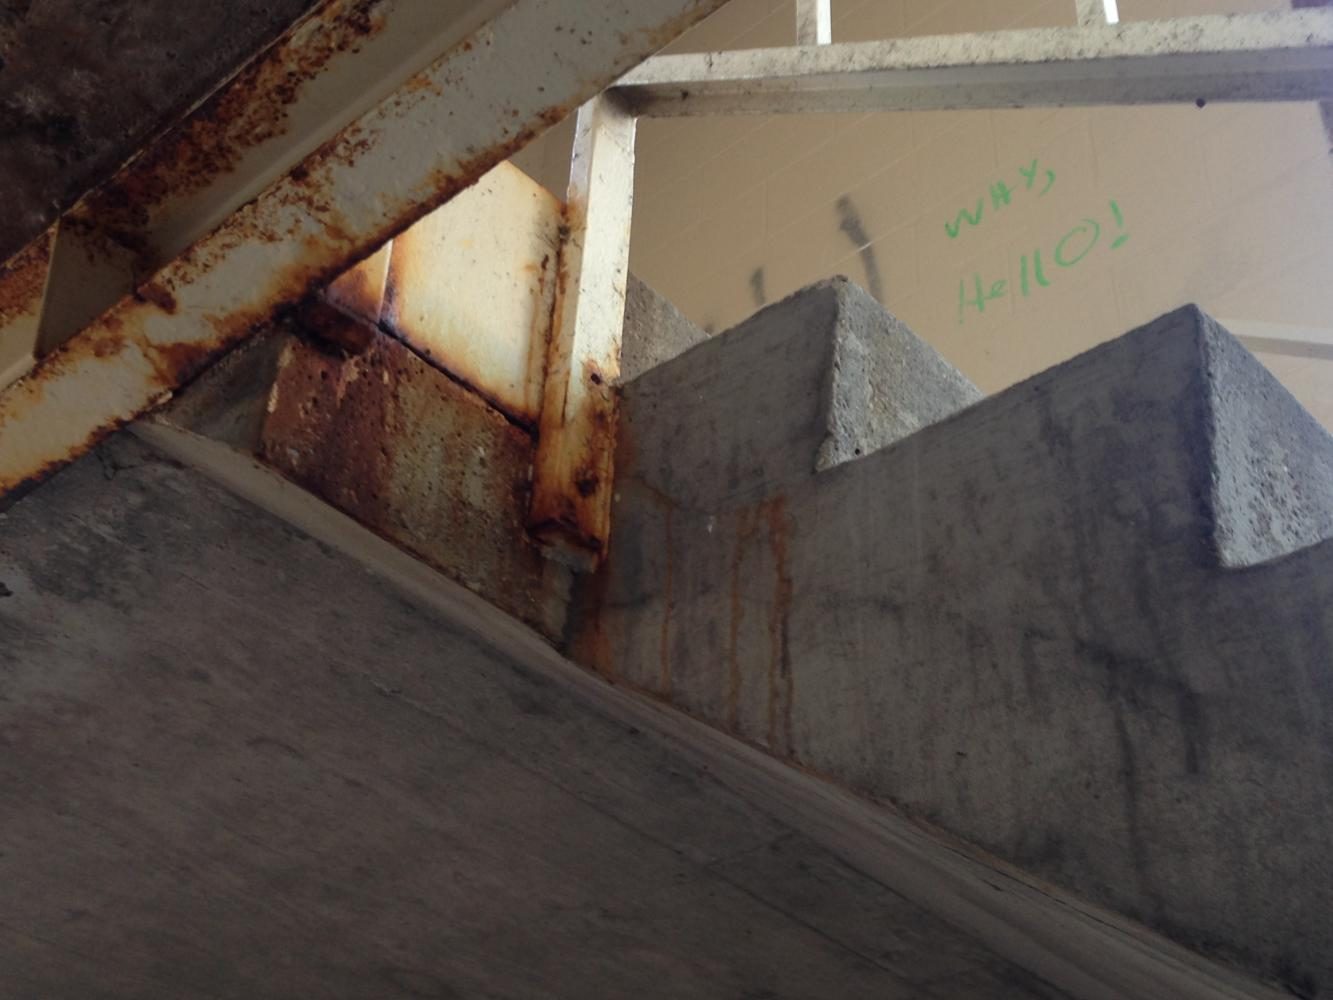 The second floor of Friedli is home to some innocent-sounding graffiti.